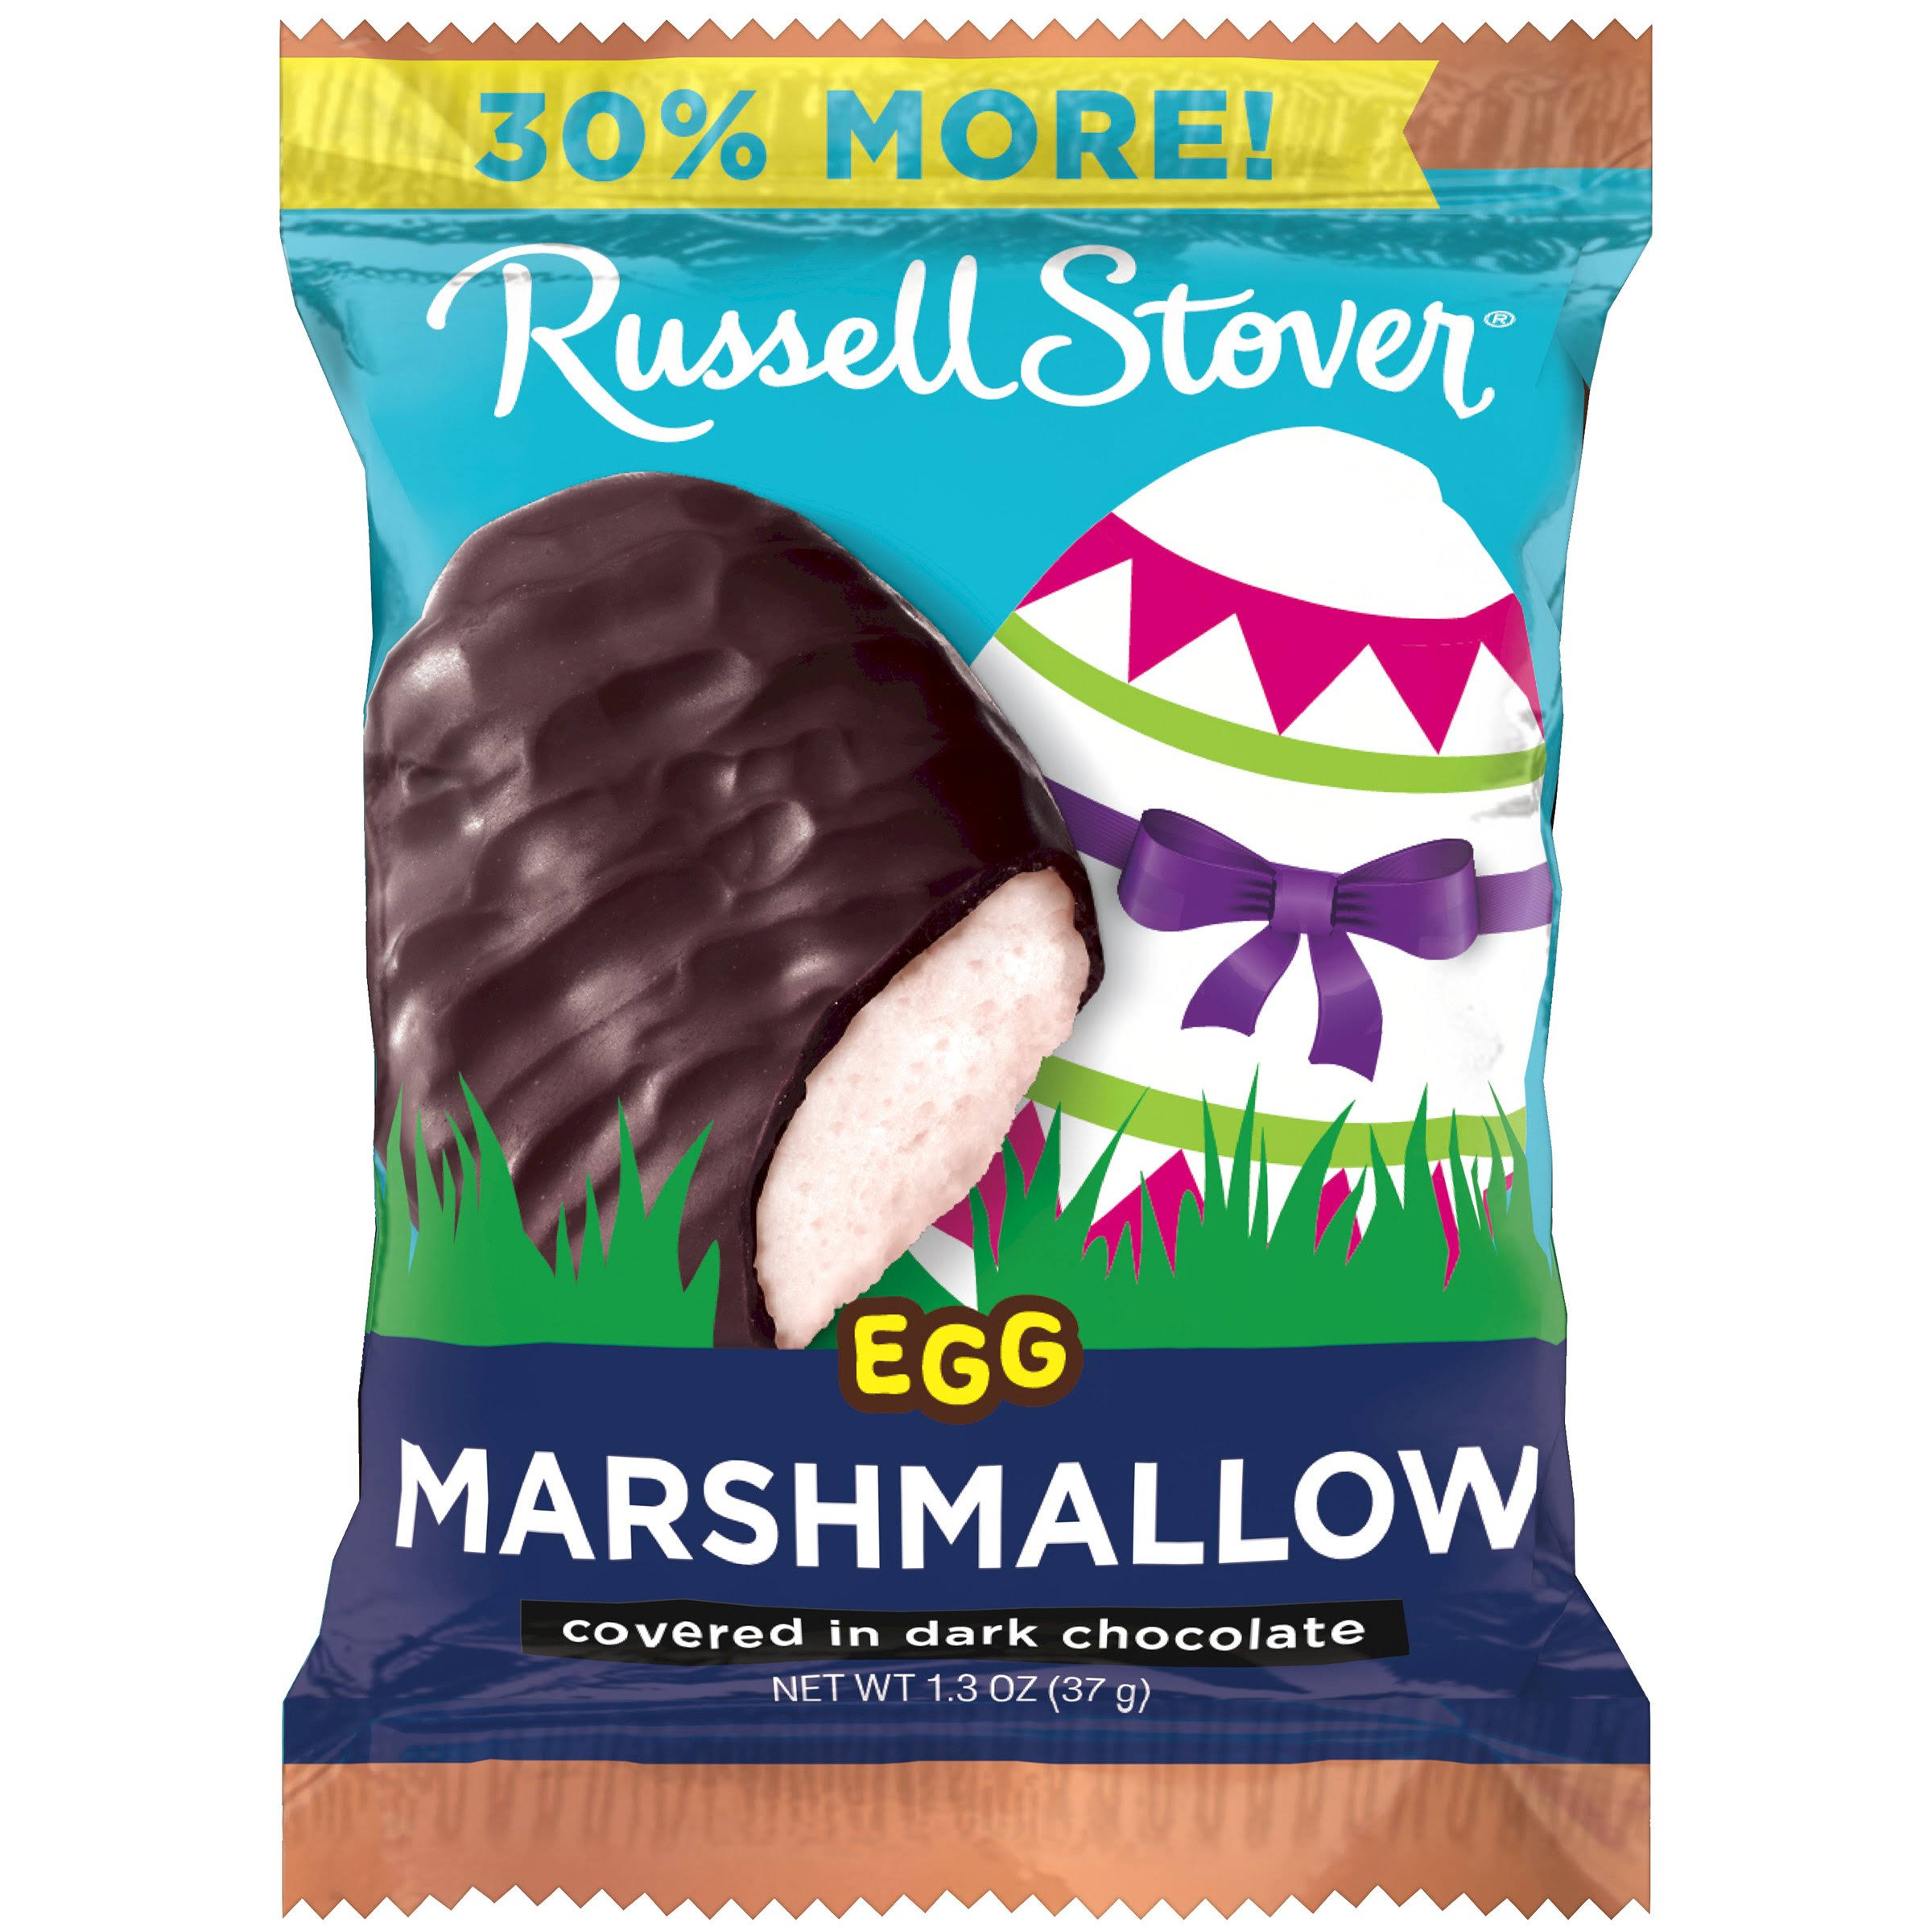 Russell Stover Dark Chocolate Marshmallow Egg - 1.3 oz